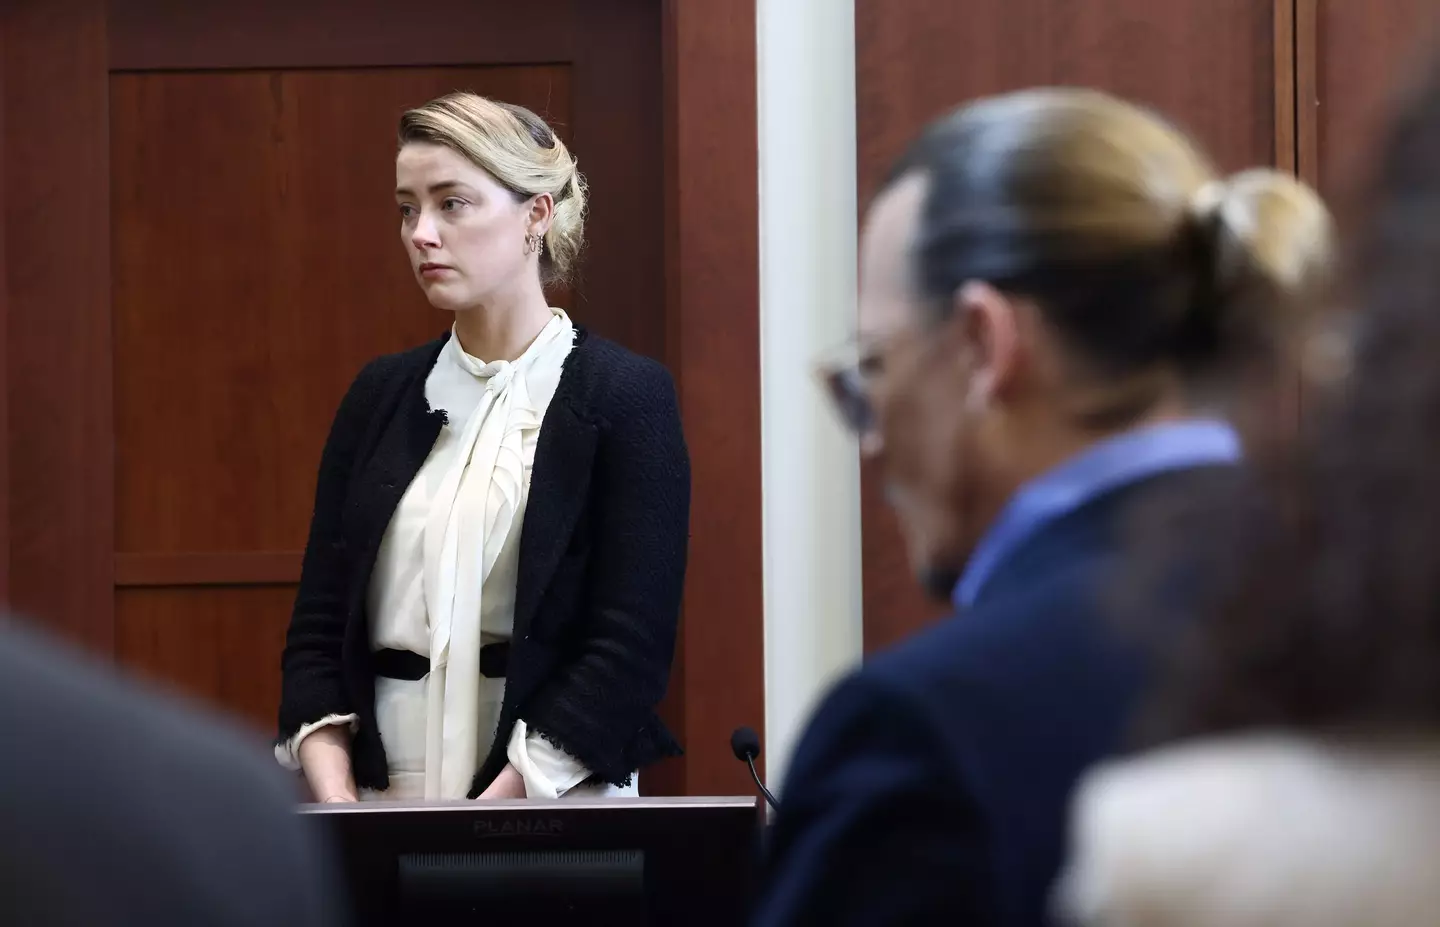 Amber Heard explained why she is yet to donate her full divorce settlement to charity as previously stated.